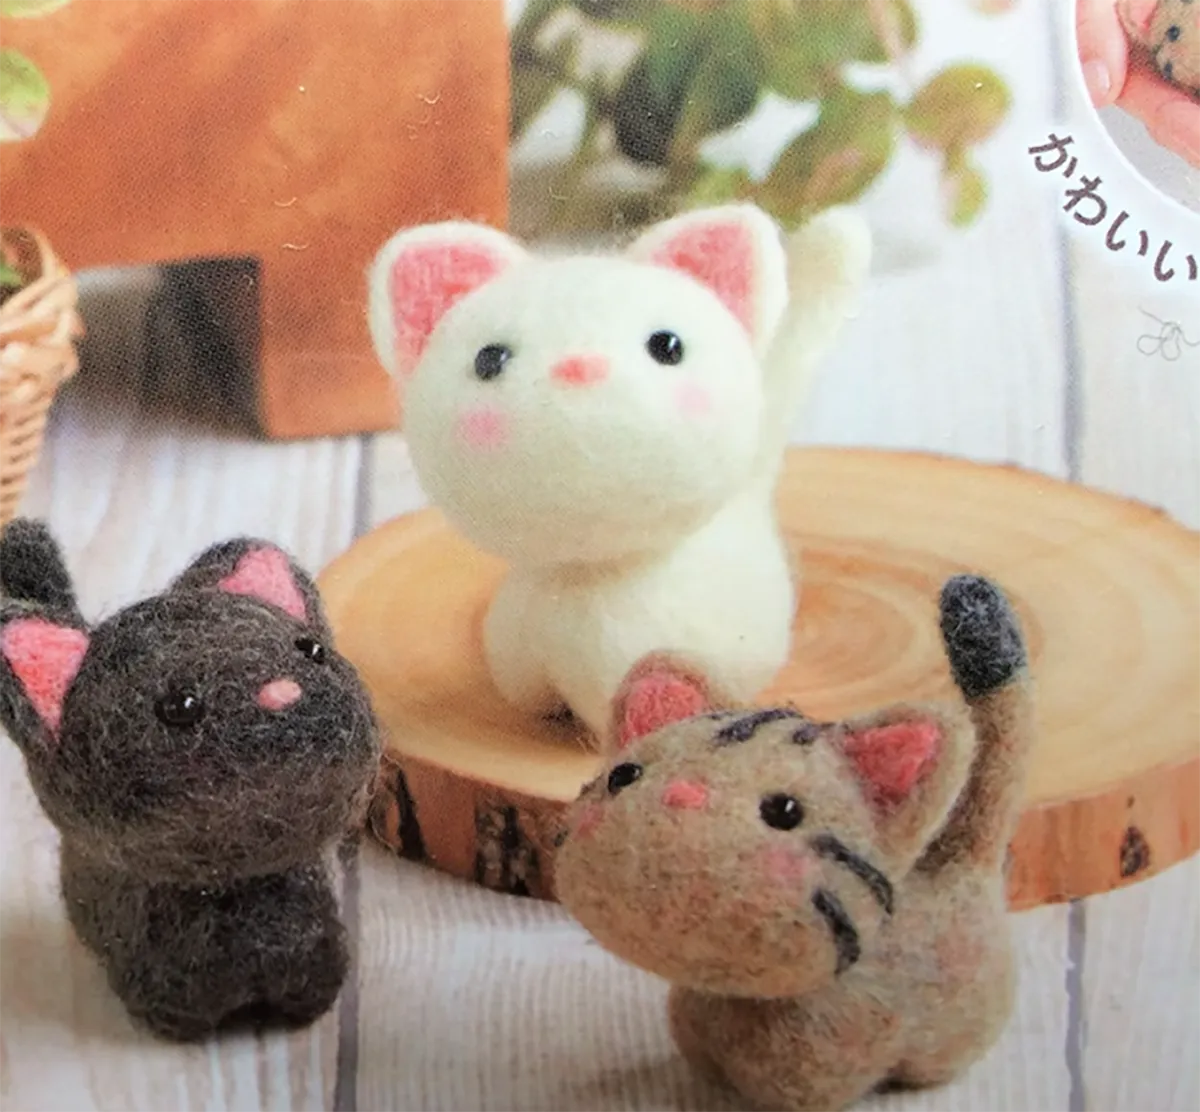 Best Needle Felting Projects for Beginners